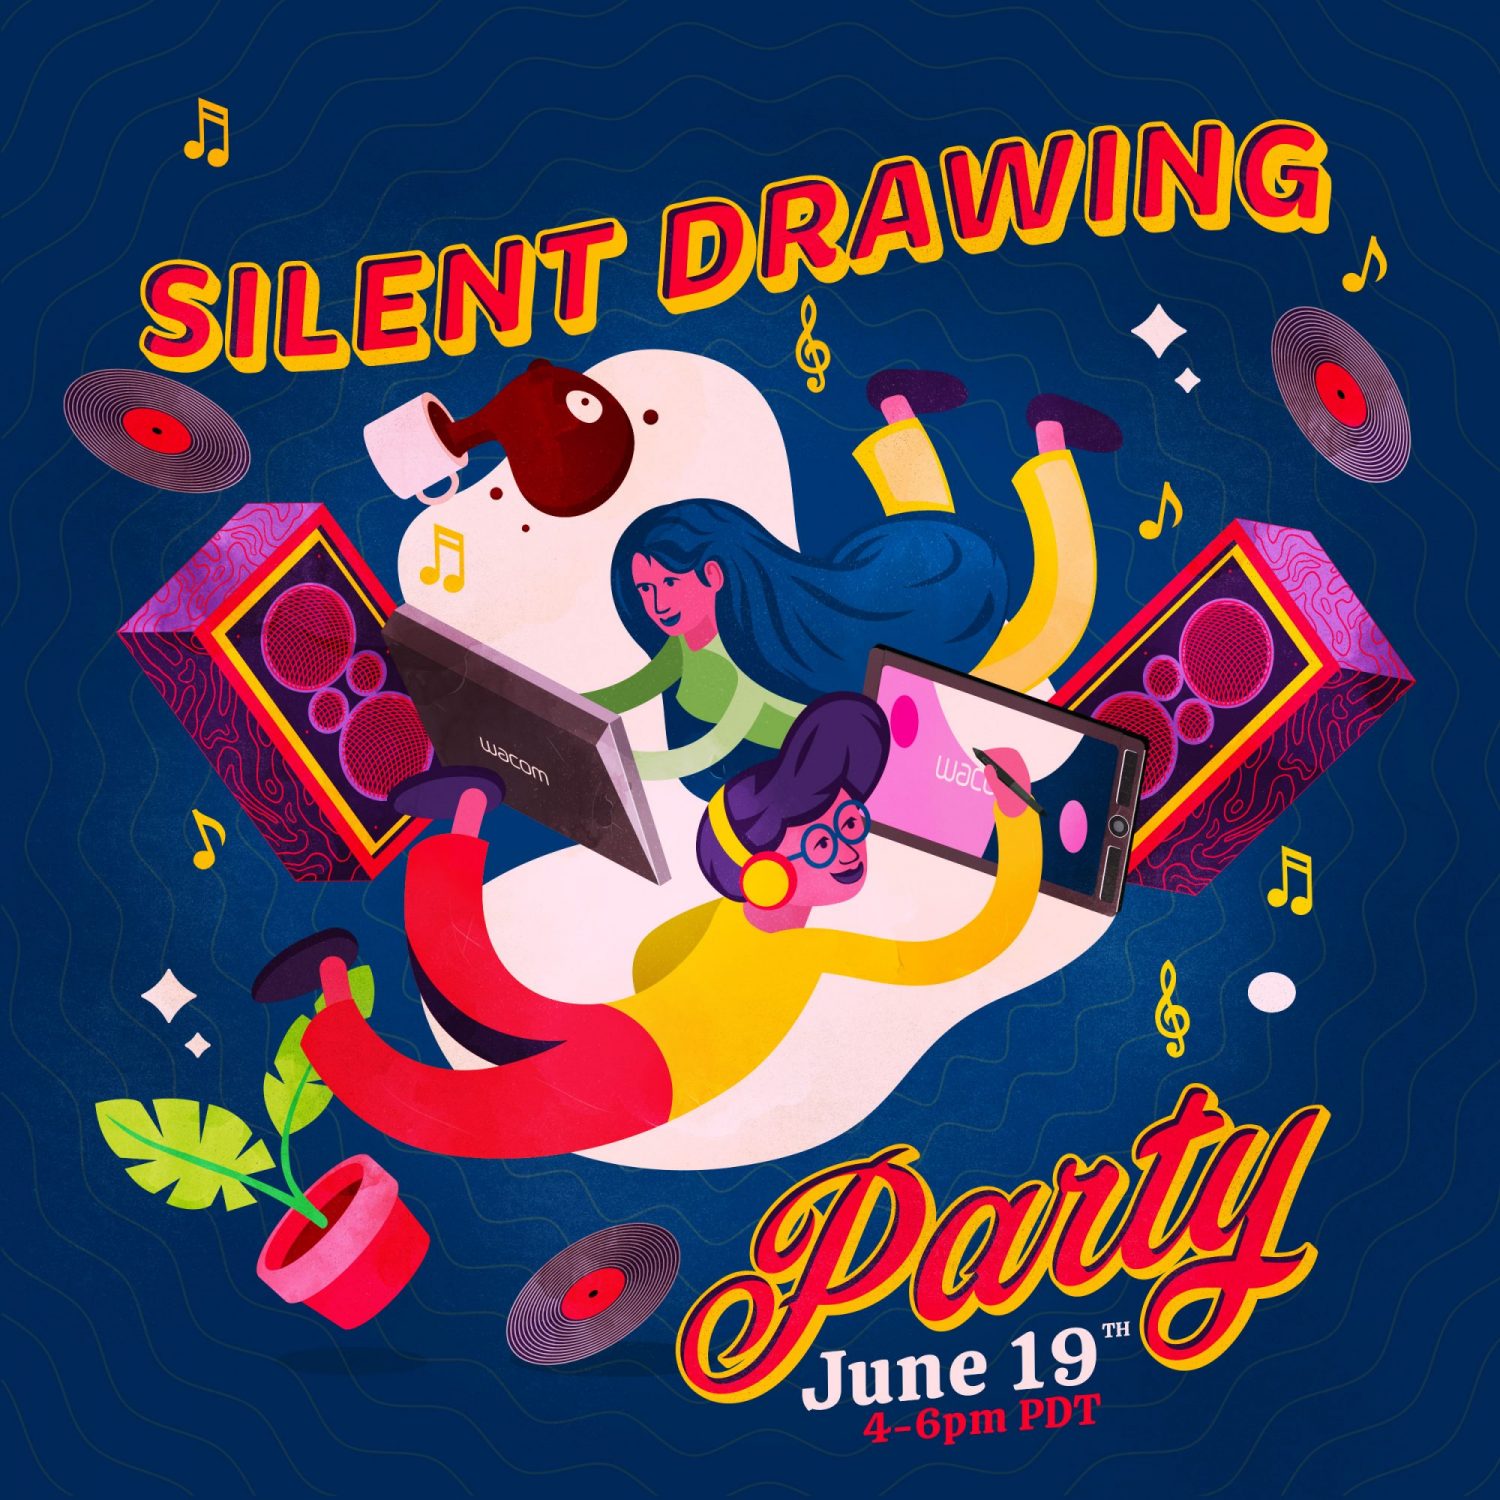 Silent Drawing Party – Featuring DJ Mechlo